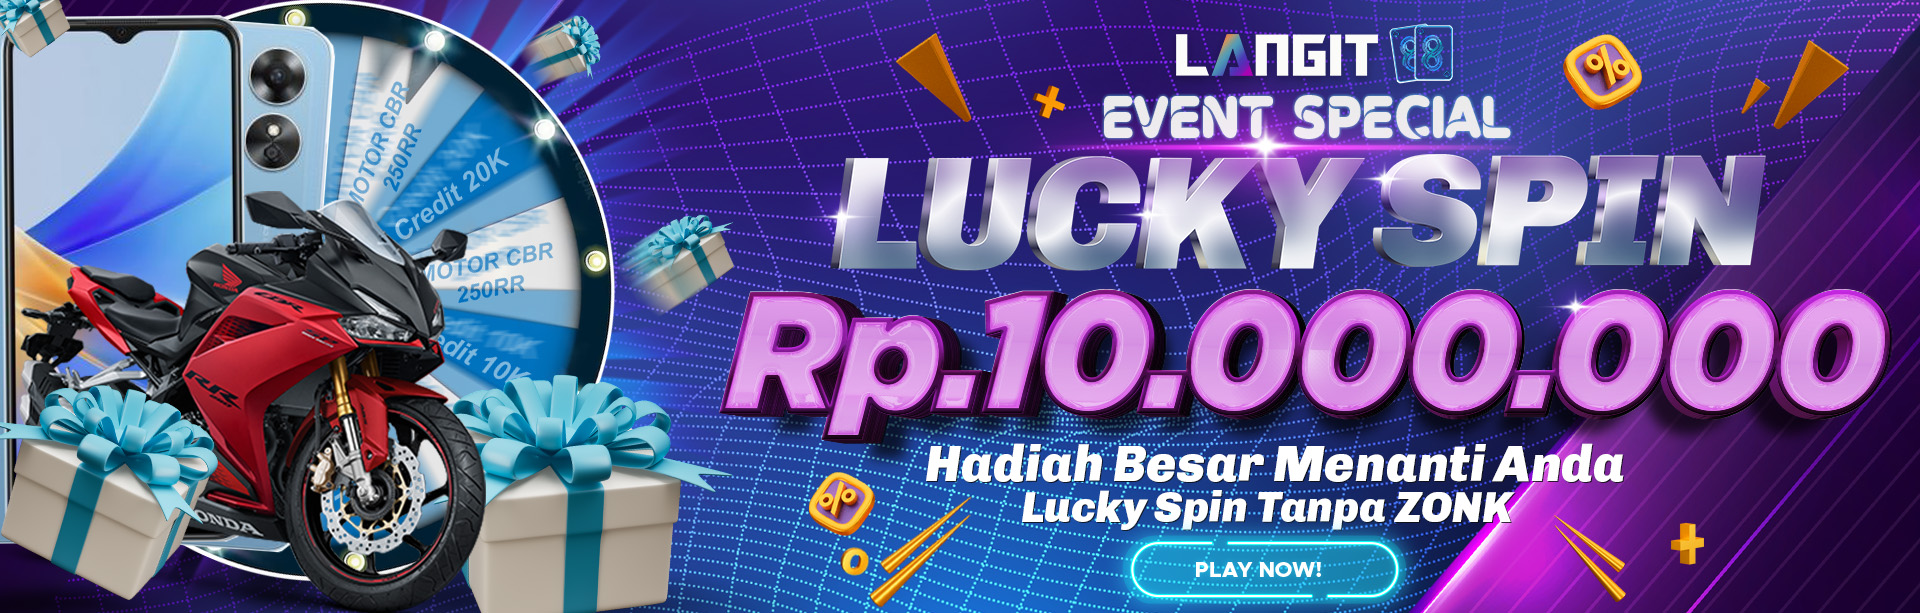 LUCKY SPIN UNTUNG